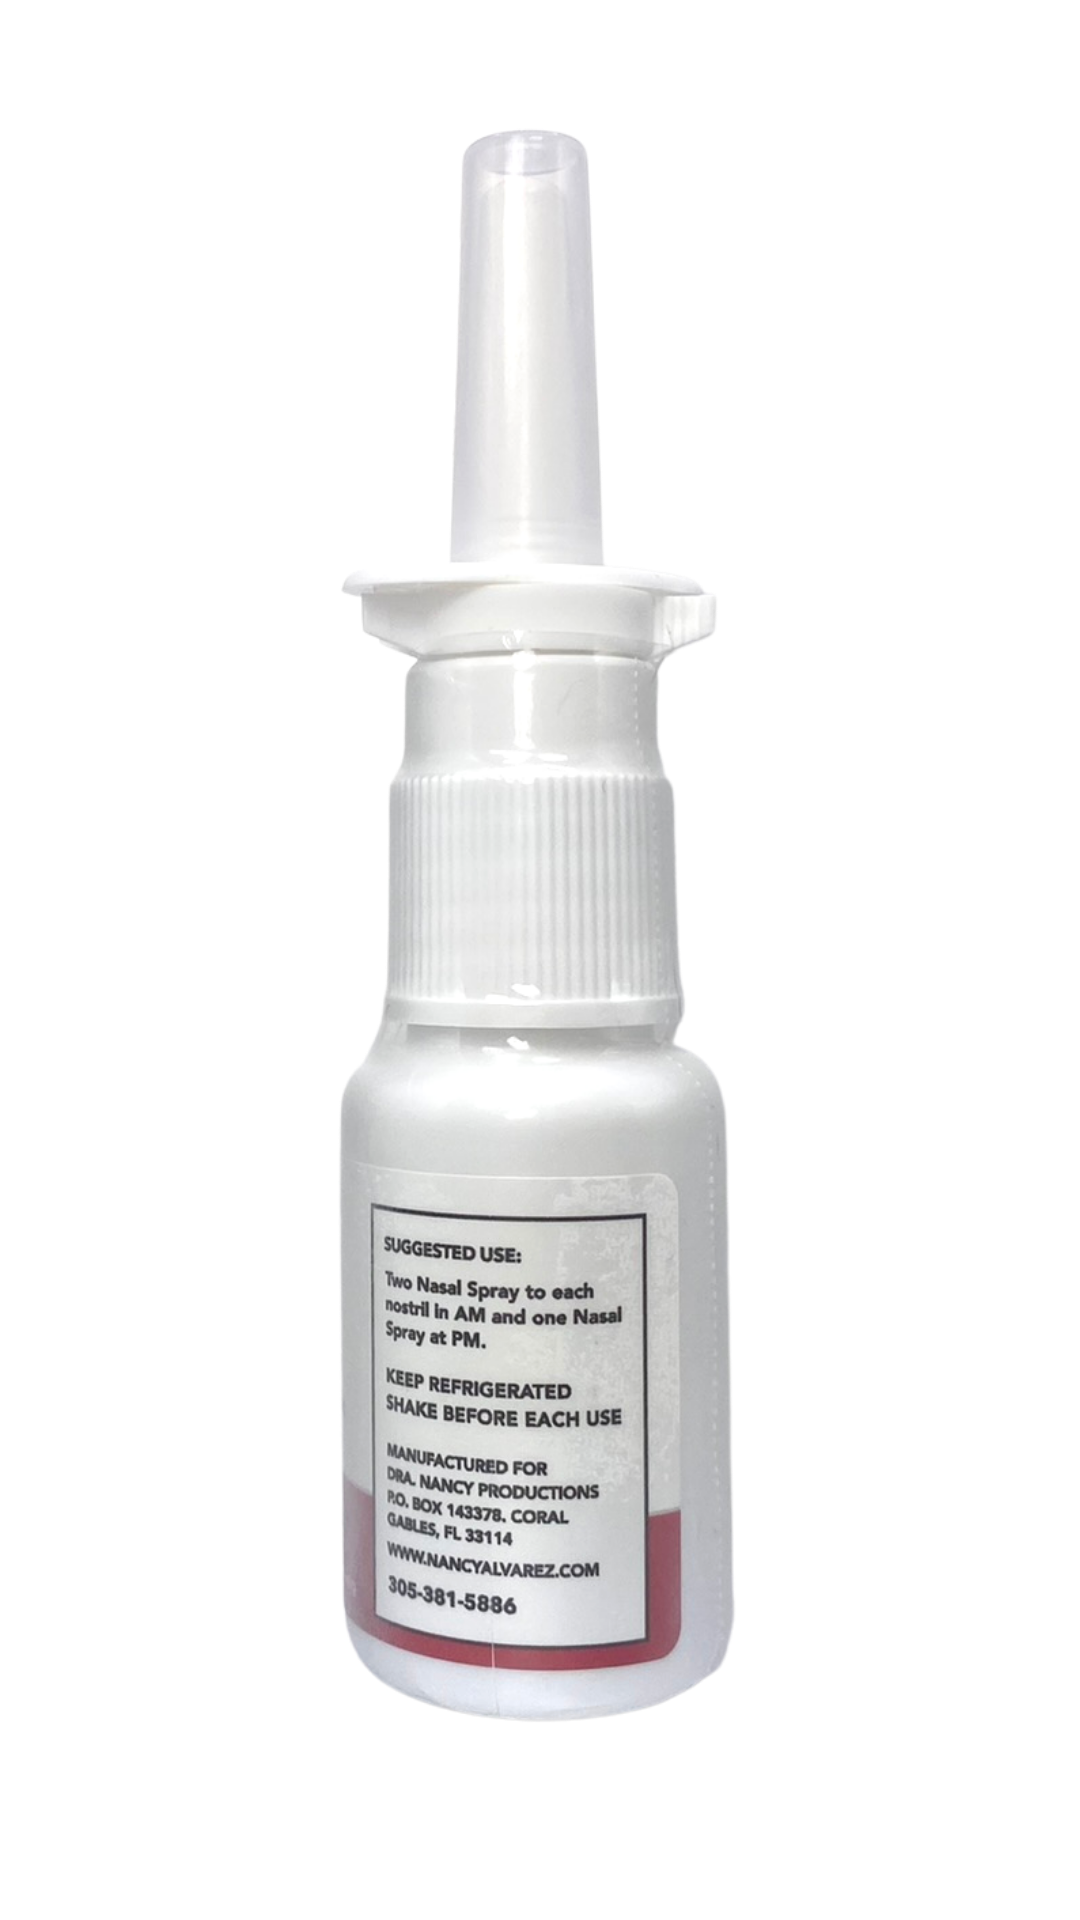 NAD+ Energy Booster  NASAL SPRAY  300 MG in 20 ML